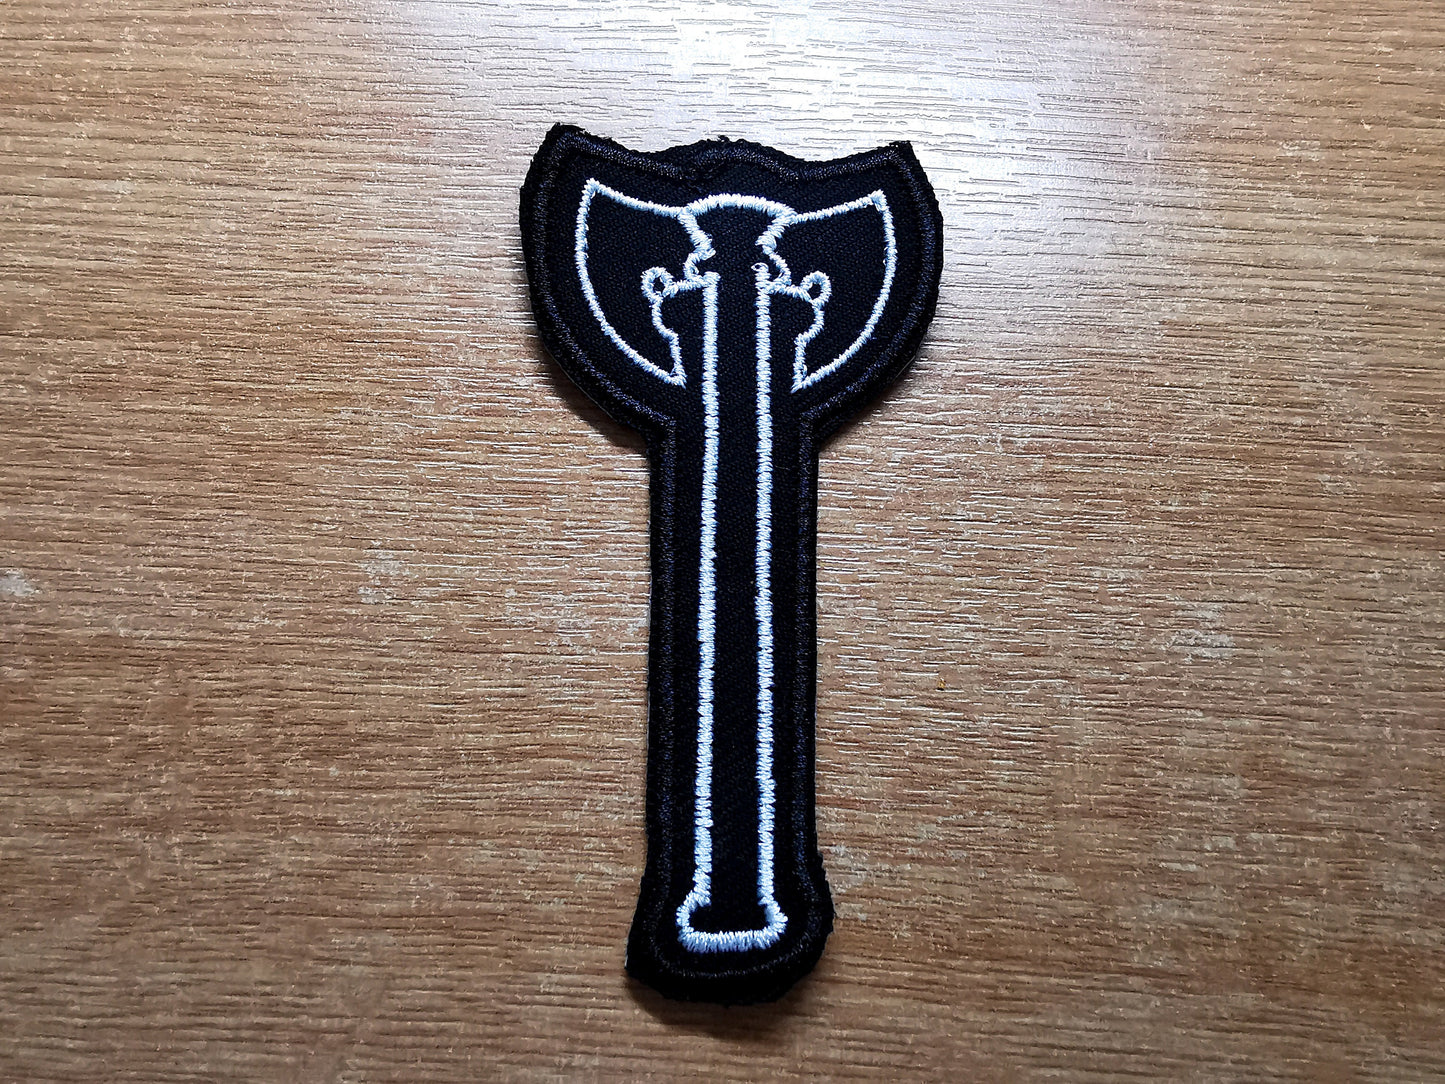 Battle Axe Embroidered Iron On Patch Destiny Fantasy RPG Vikings Medieval Dungeon Gaming